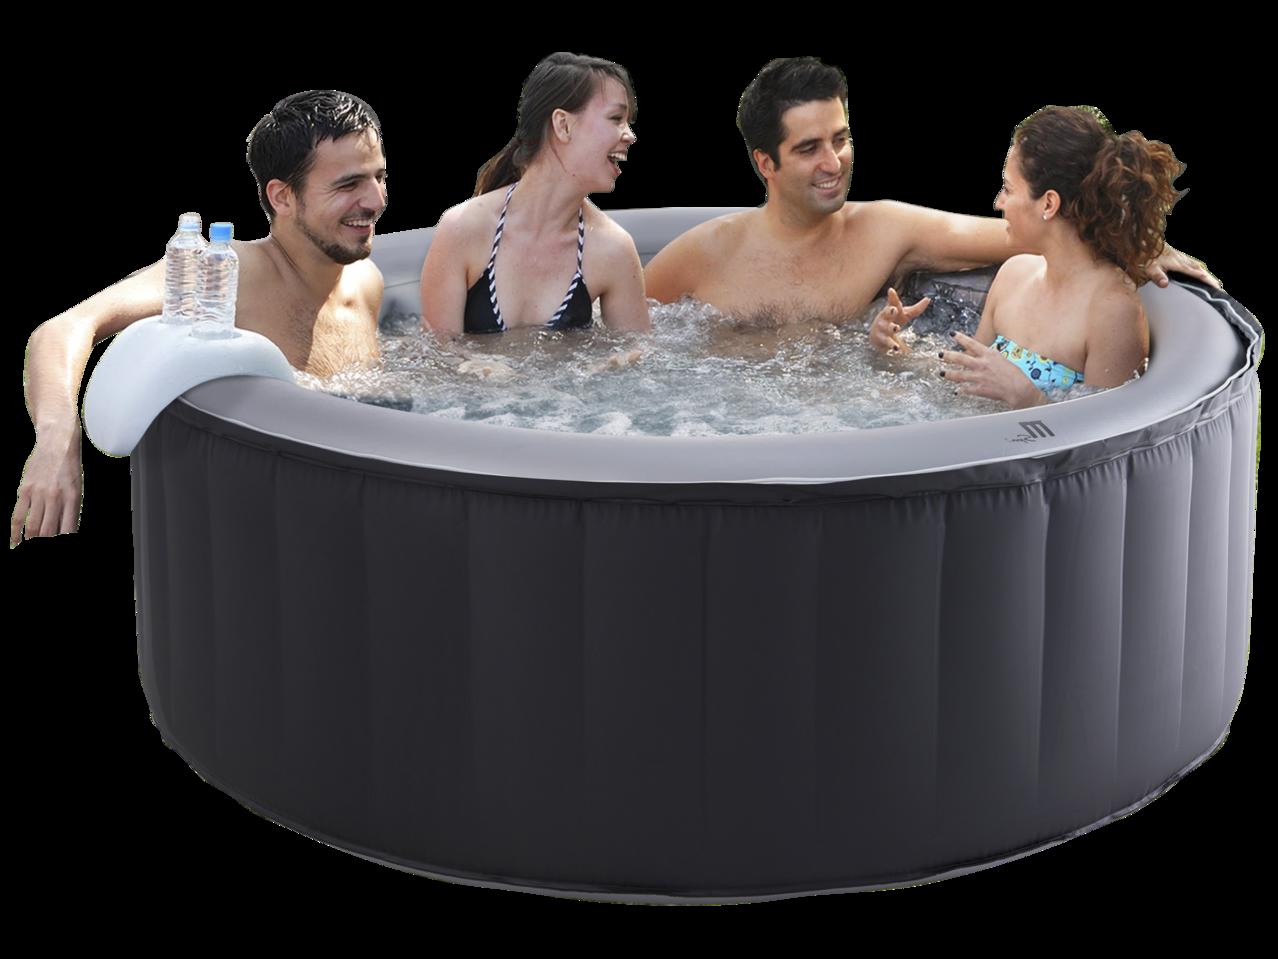 700L Inflatable Whirlpool Hot Tub